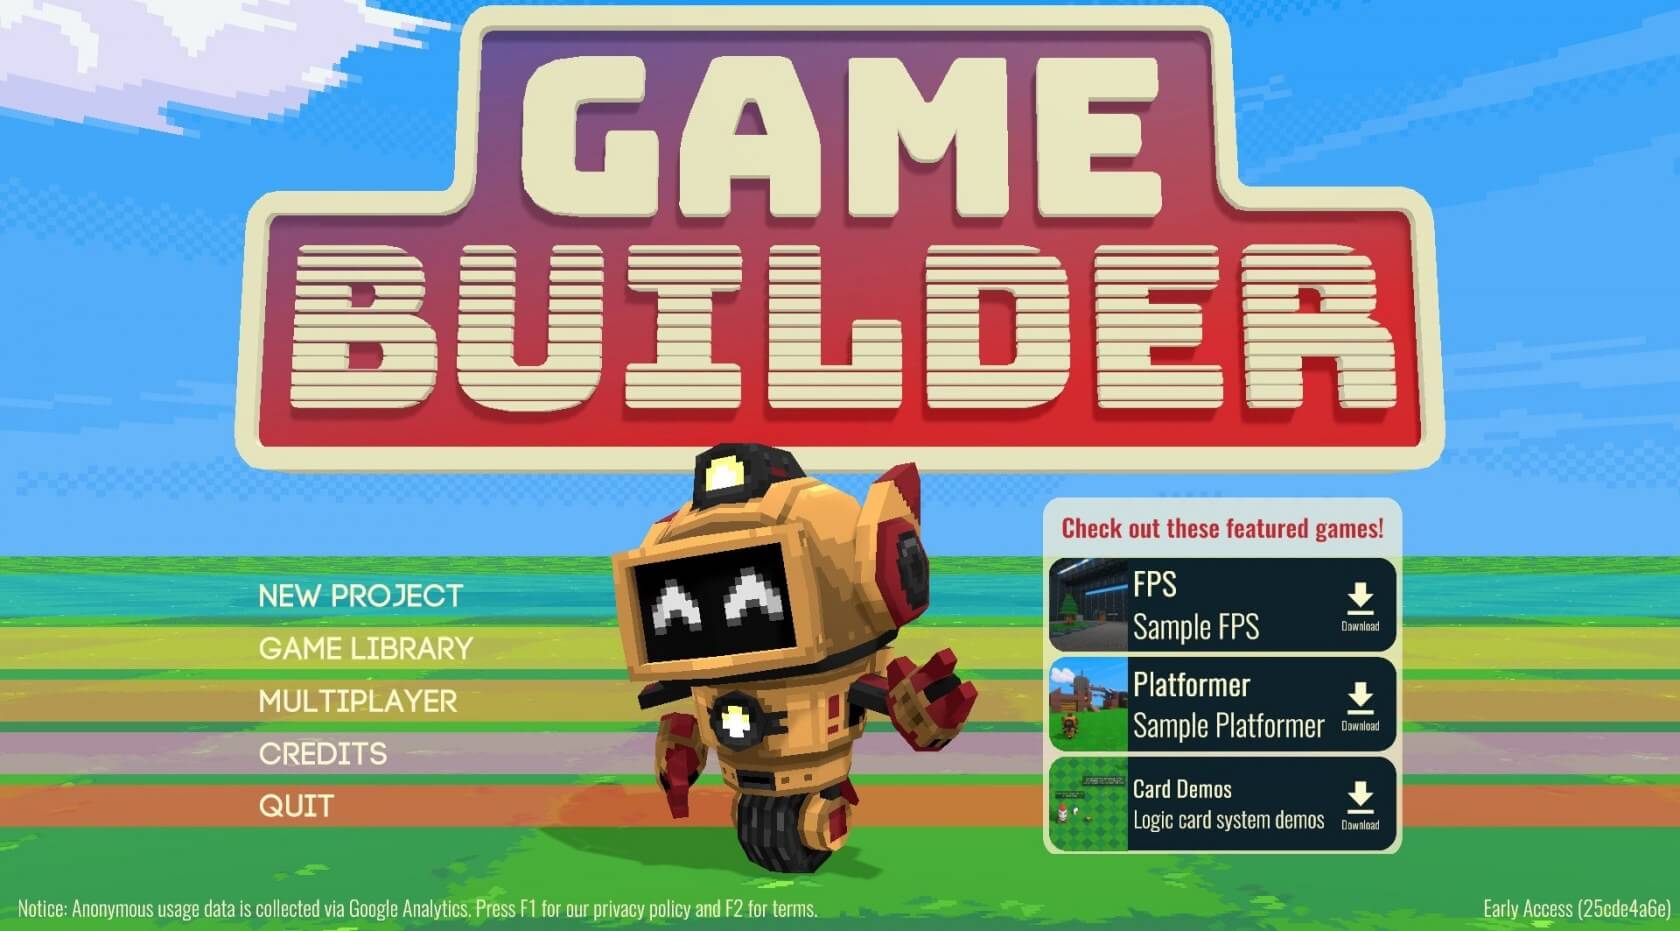 Google's 'Game Builder' tool lets you create 3D games with no programming experience